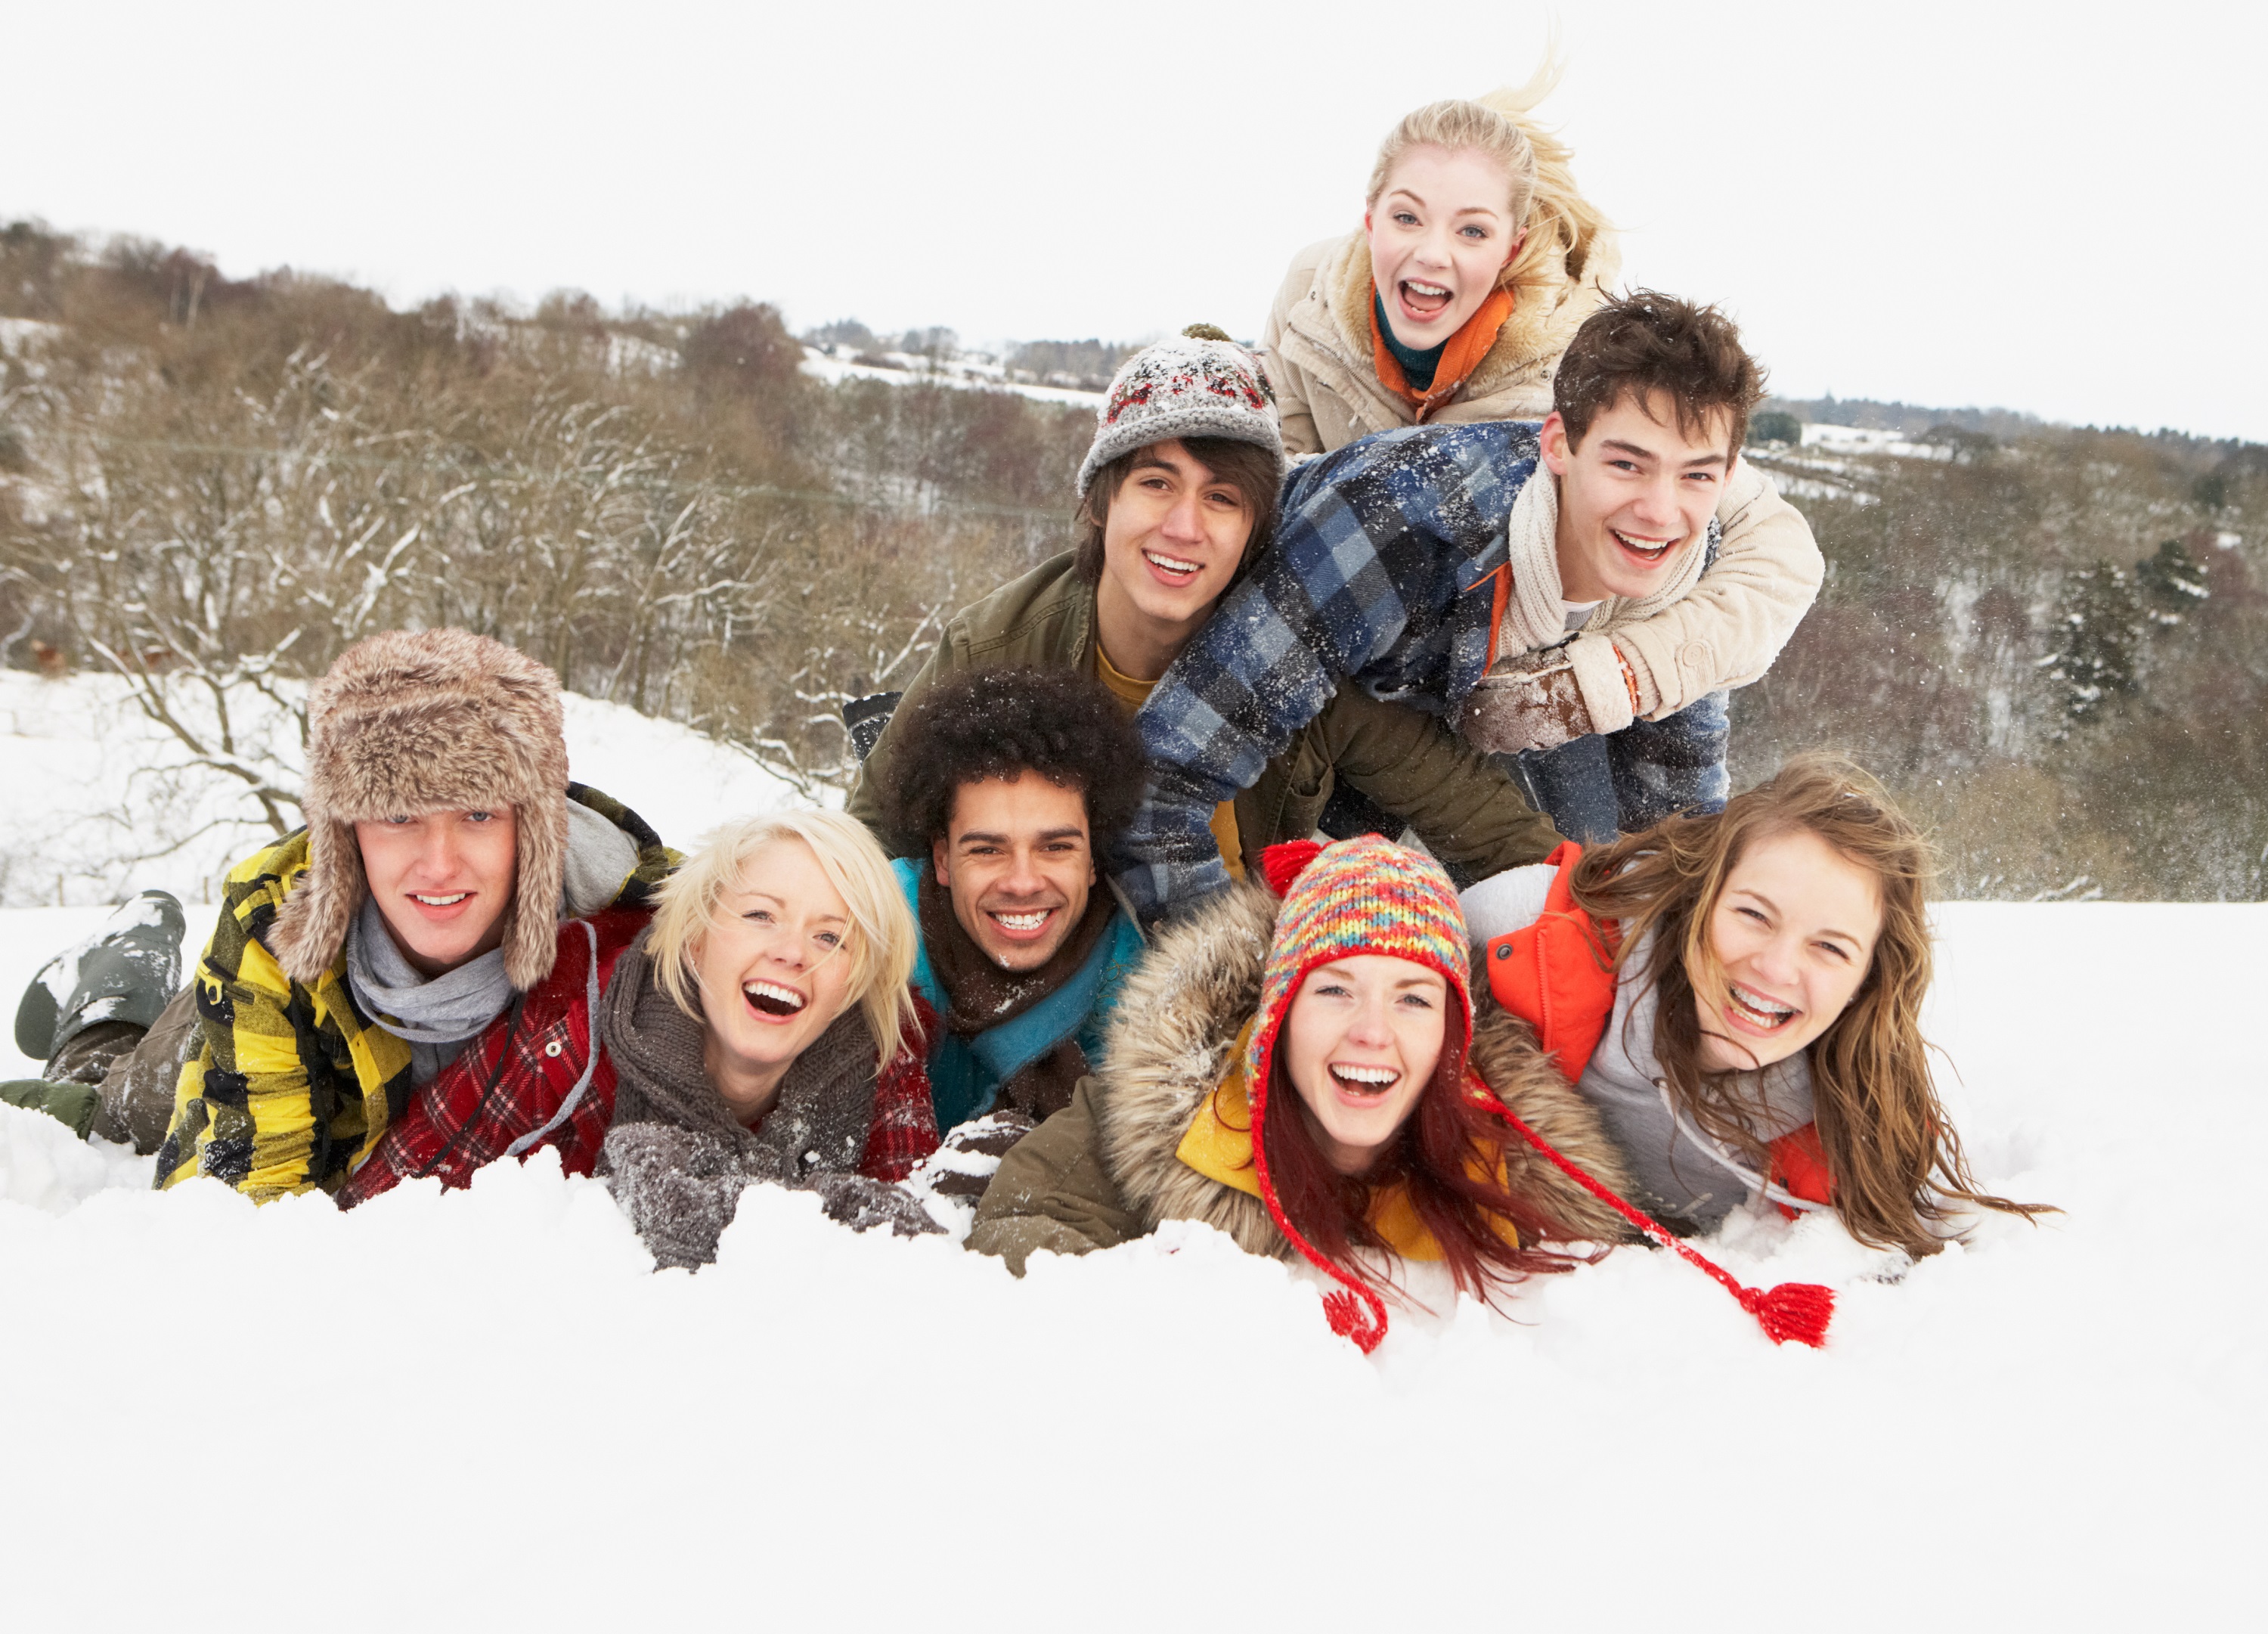 group of smiling young teens in the snow